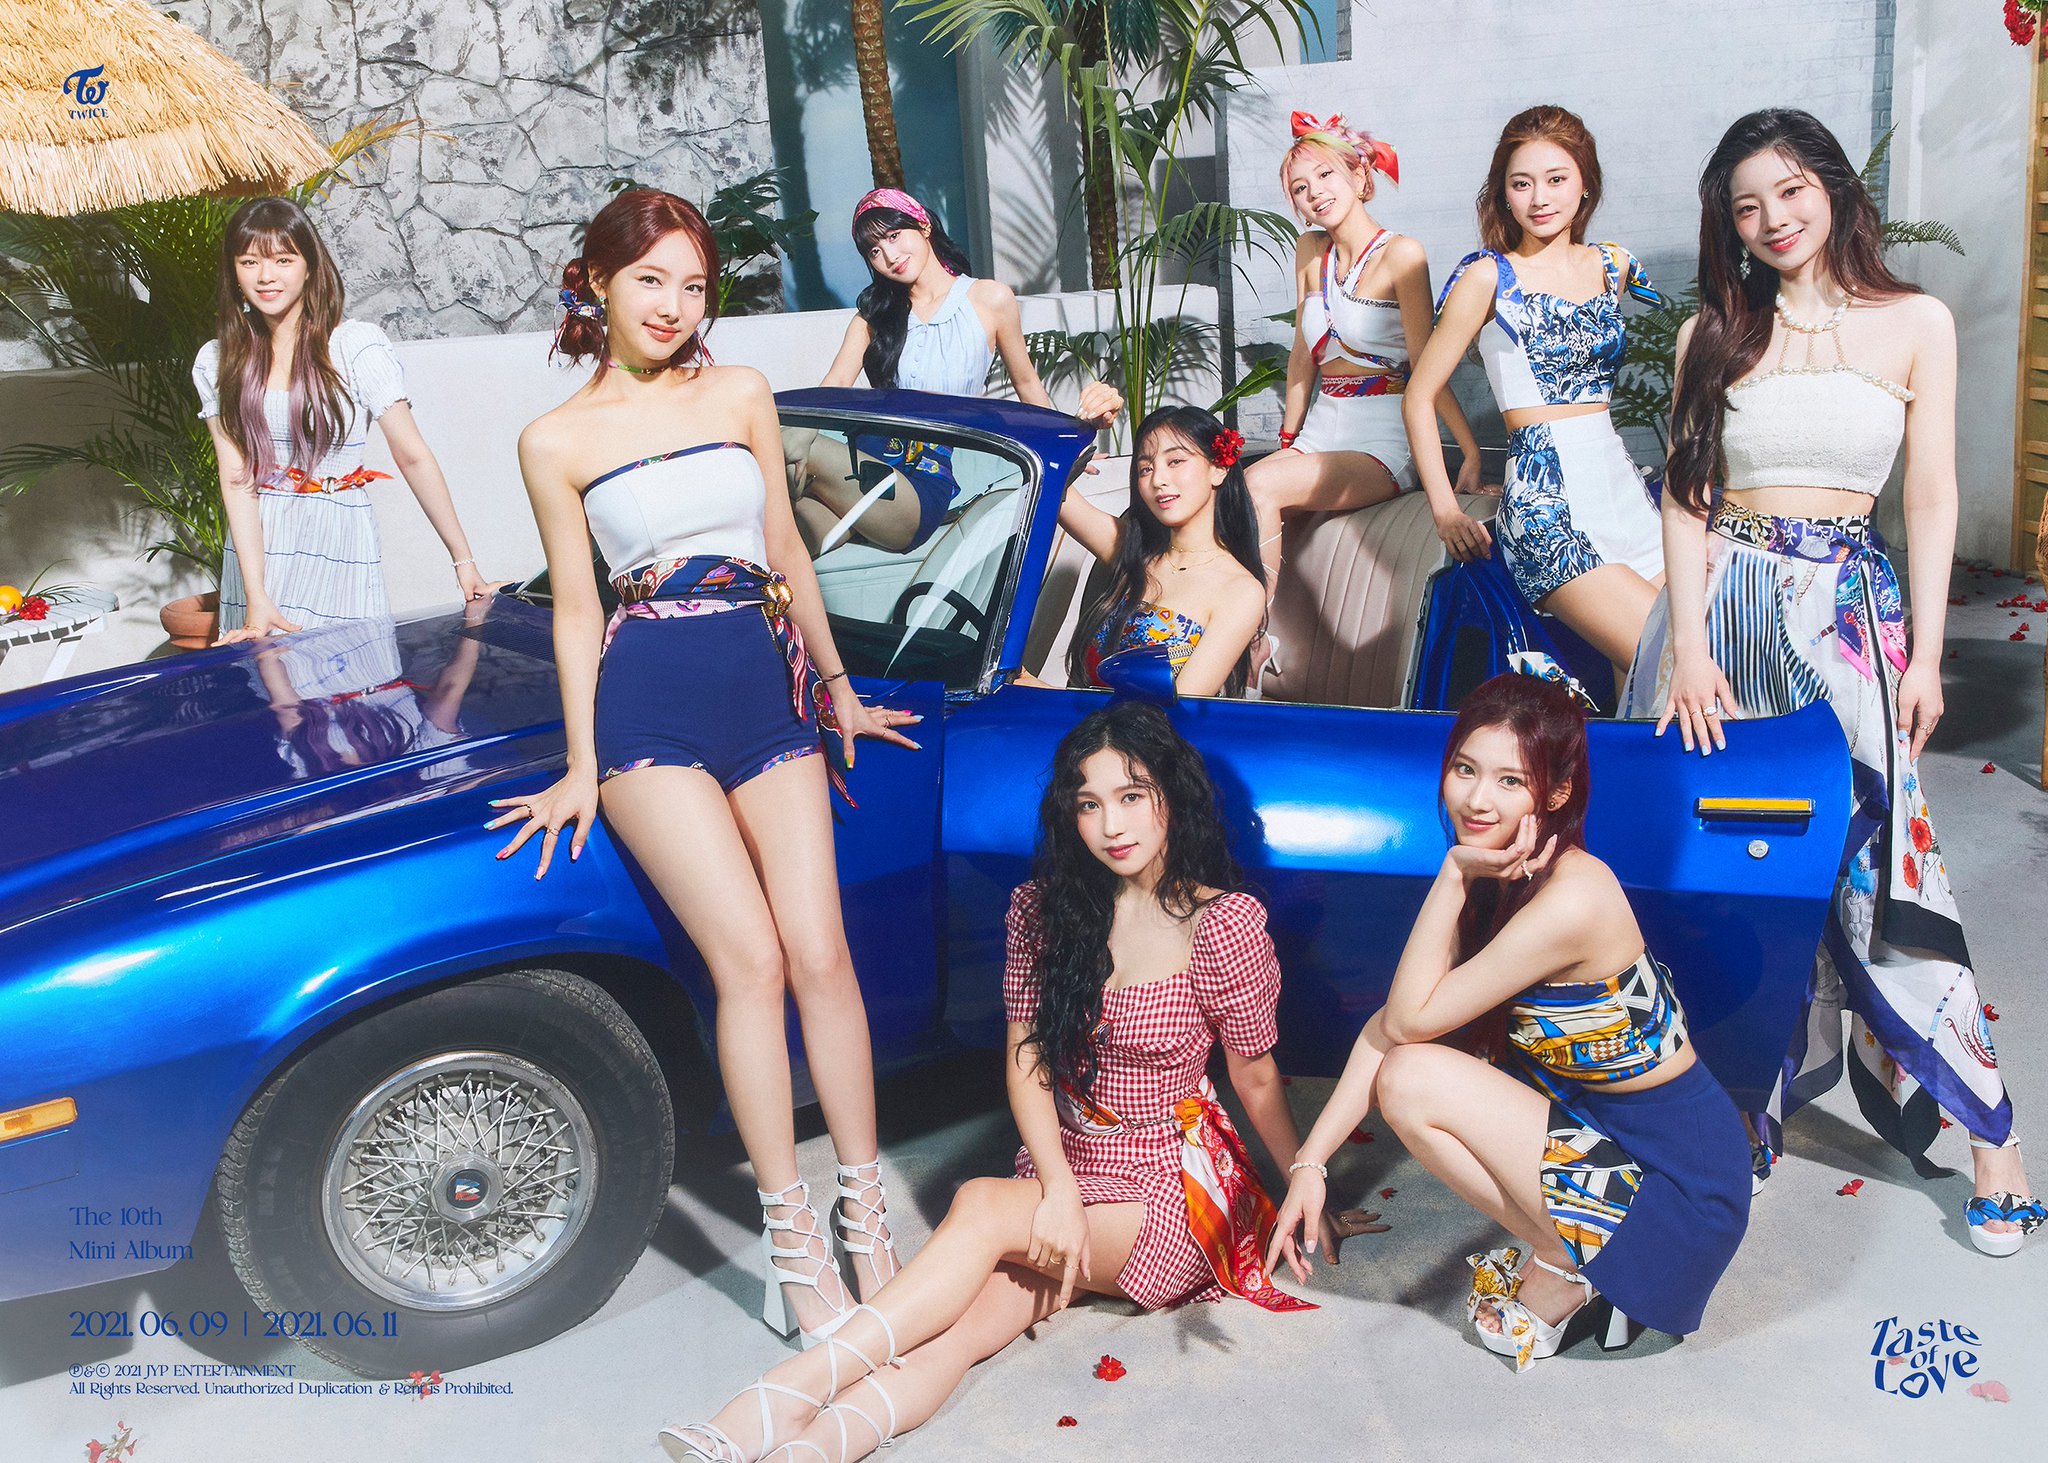 Twice First-Ever English Digital Single Release Date